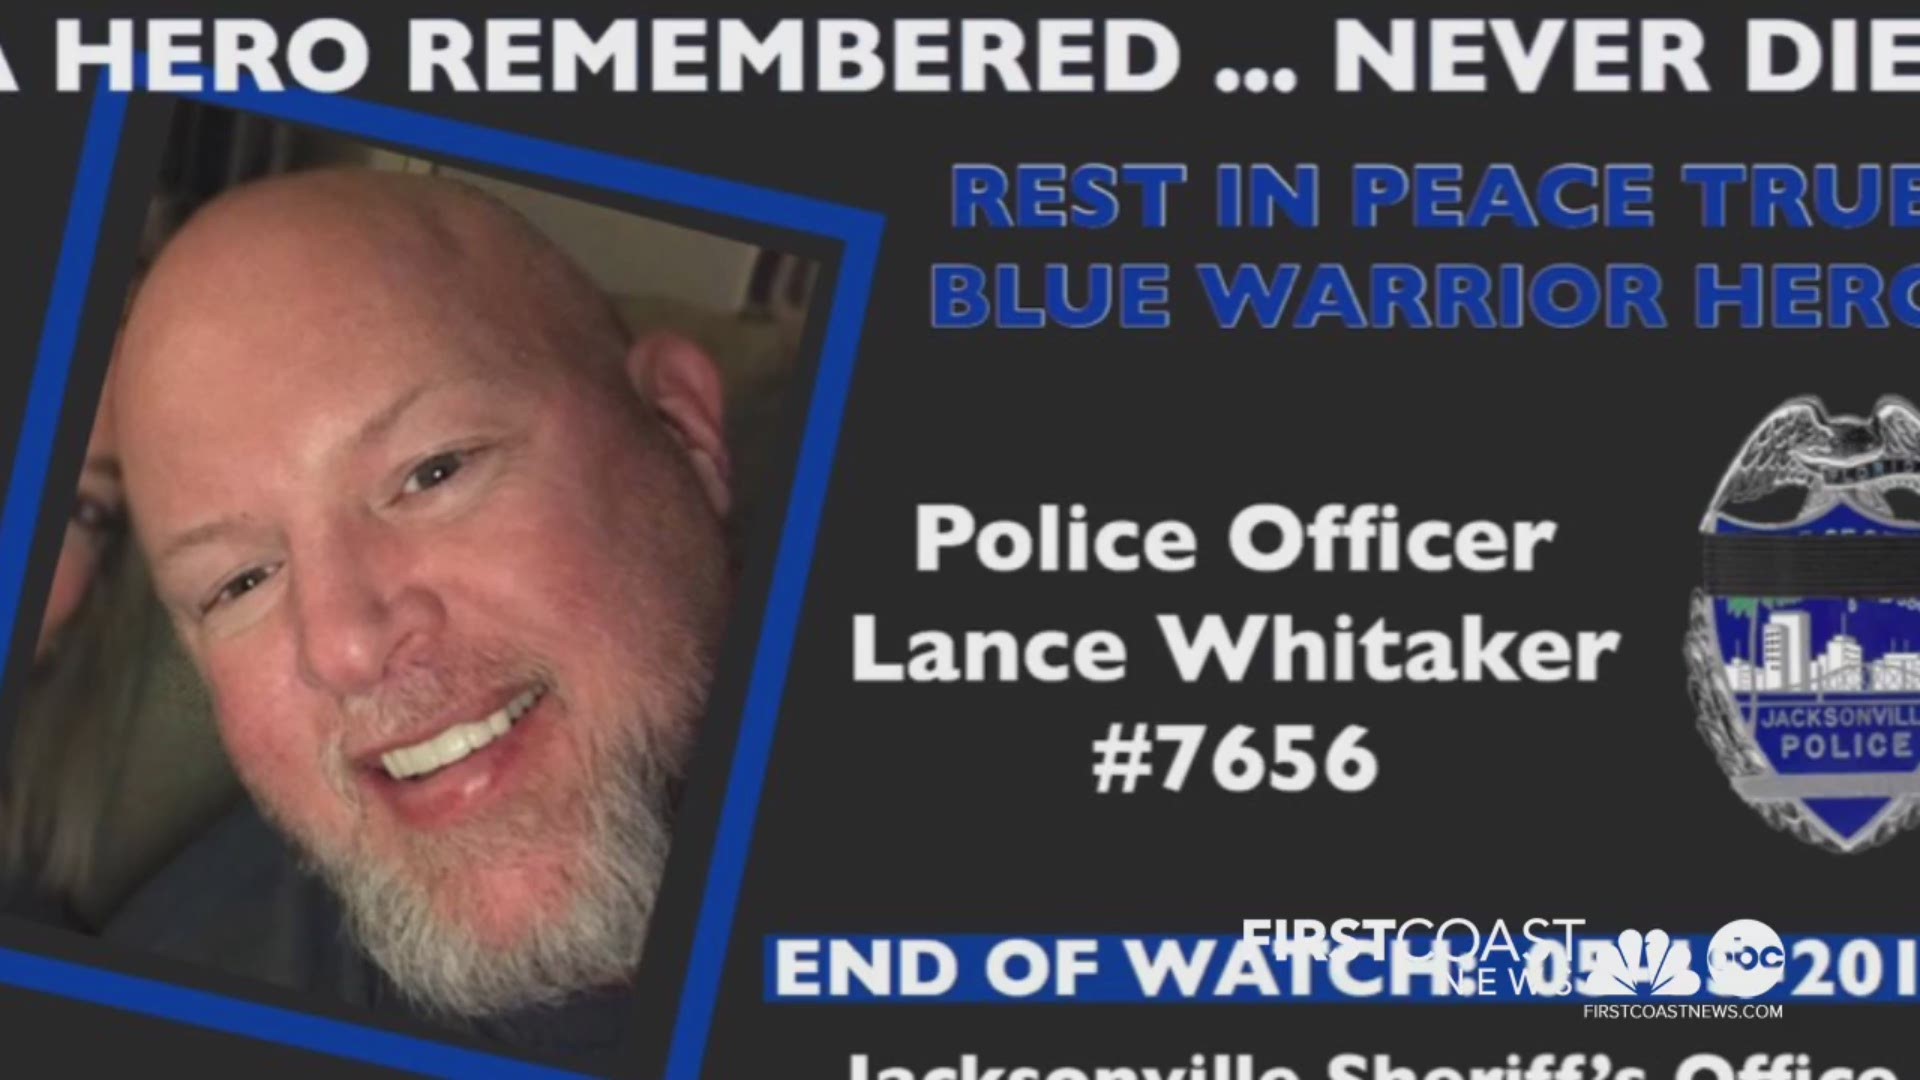 The Jacksonville Sheriff's Office encourages families to line the streets in honor of Officer Lance Whitaker who died in a crash while trying to help others. Here?s what you need to know.